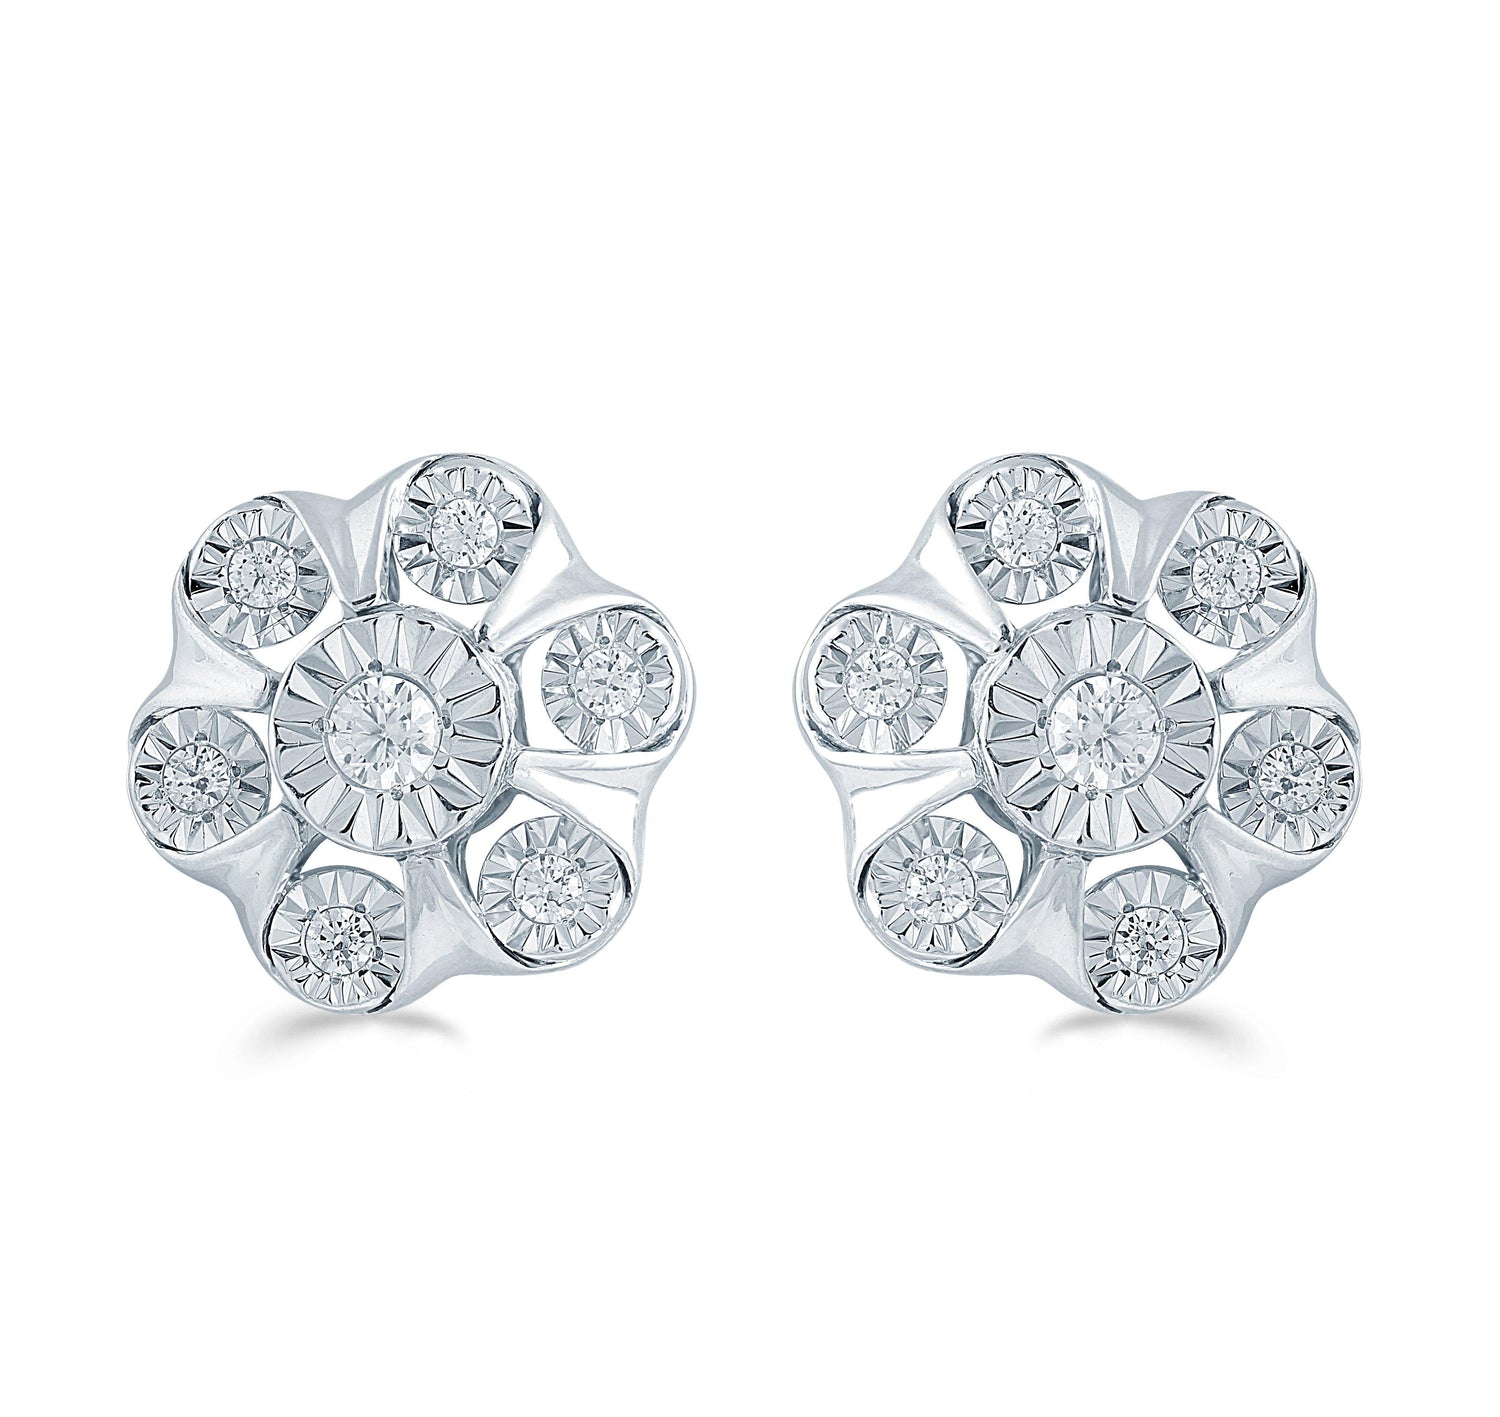 1/4CT TW  Diamond Floral Cluster Stud Earrings in Sterling Silver - Fifth and Fine